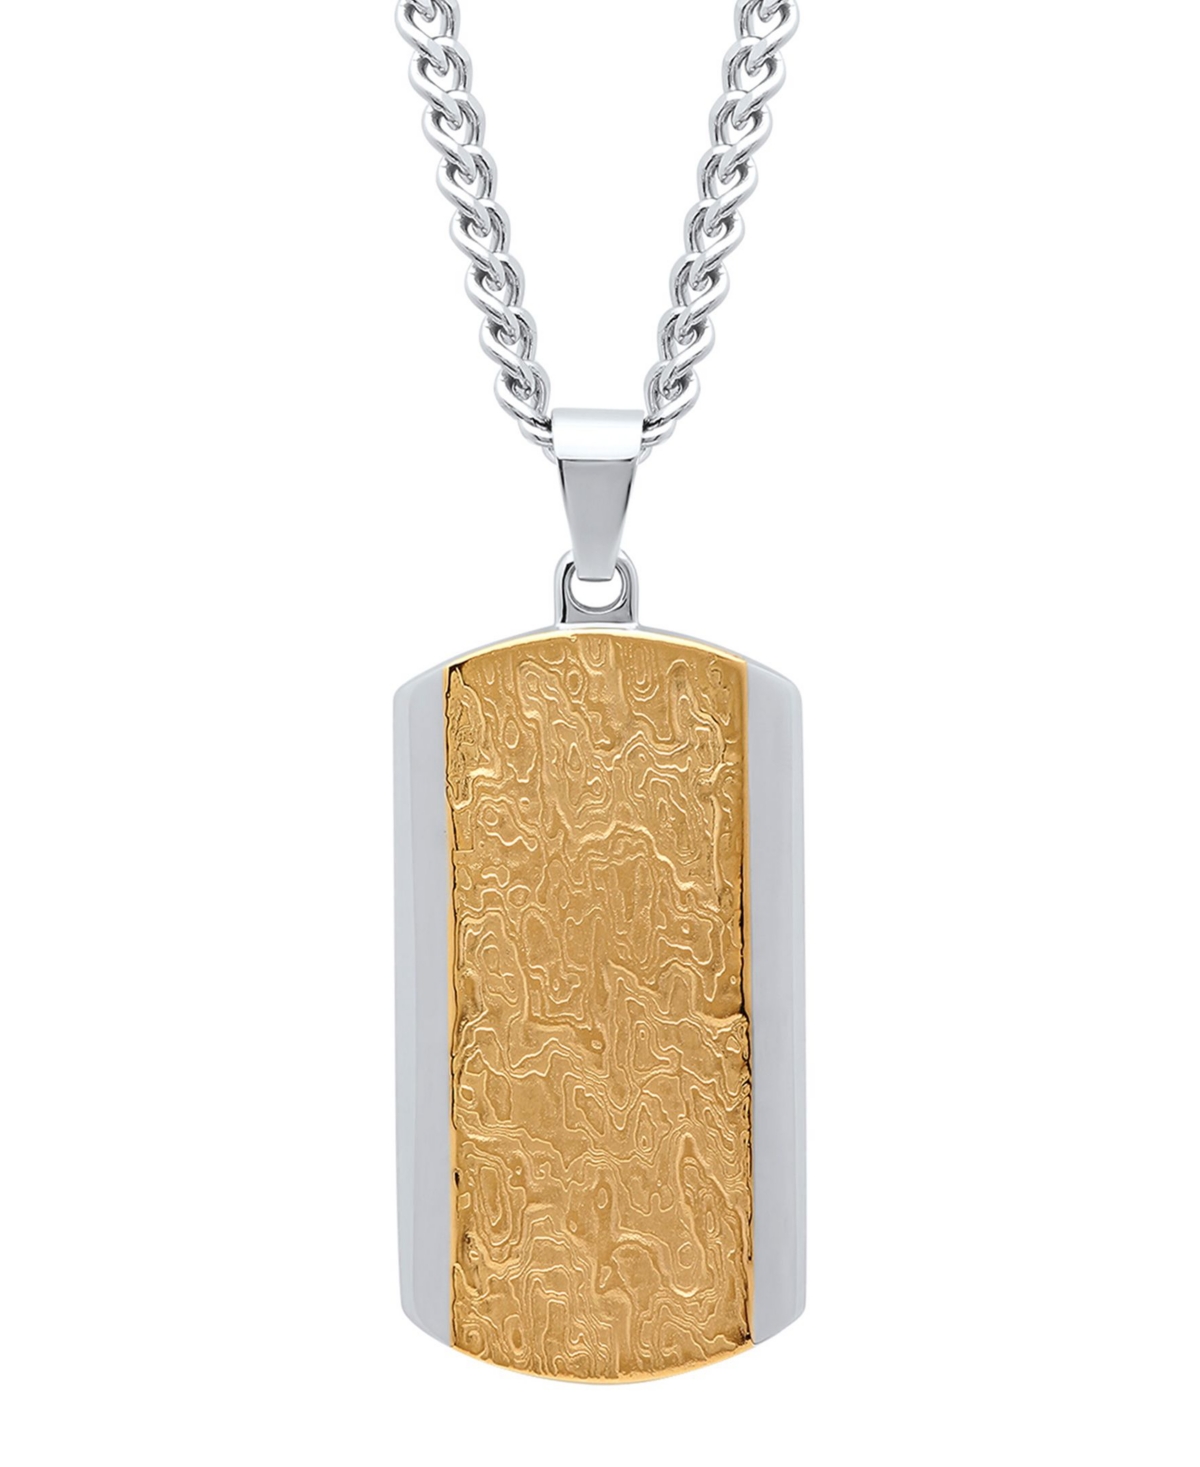 C & c Jewelry Men's Textured Dog Tag in Two-Tone Stainless Steel Pendant Necklace